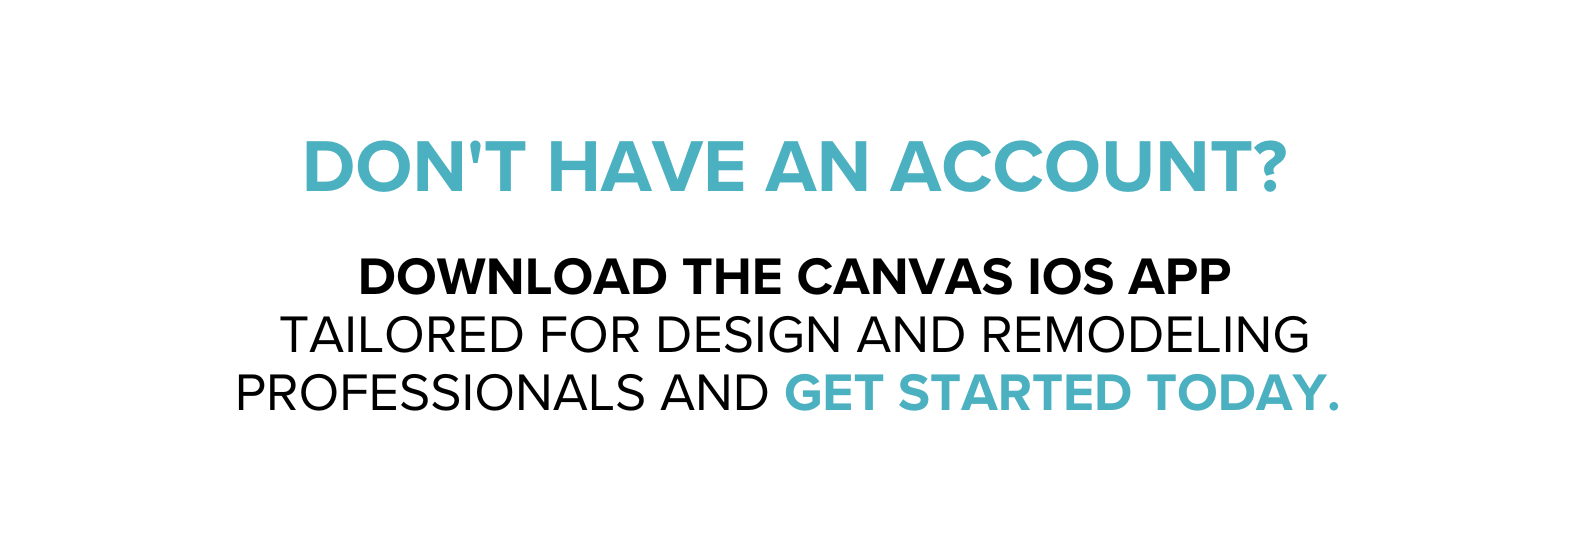 Canvas CTA for downloading the app